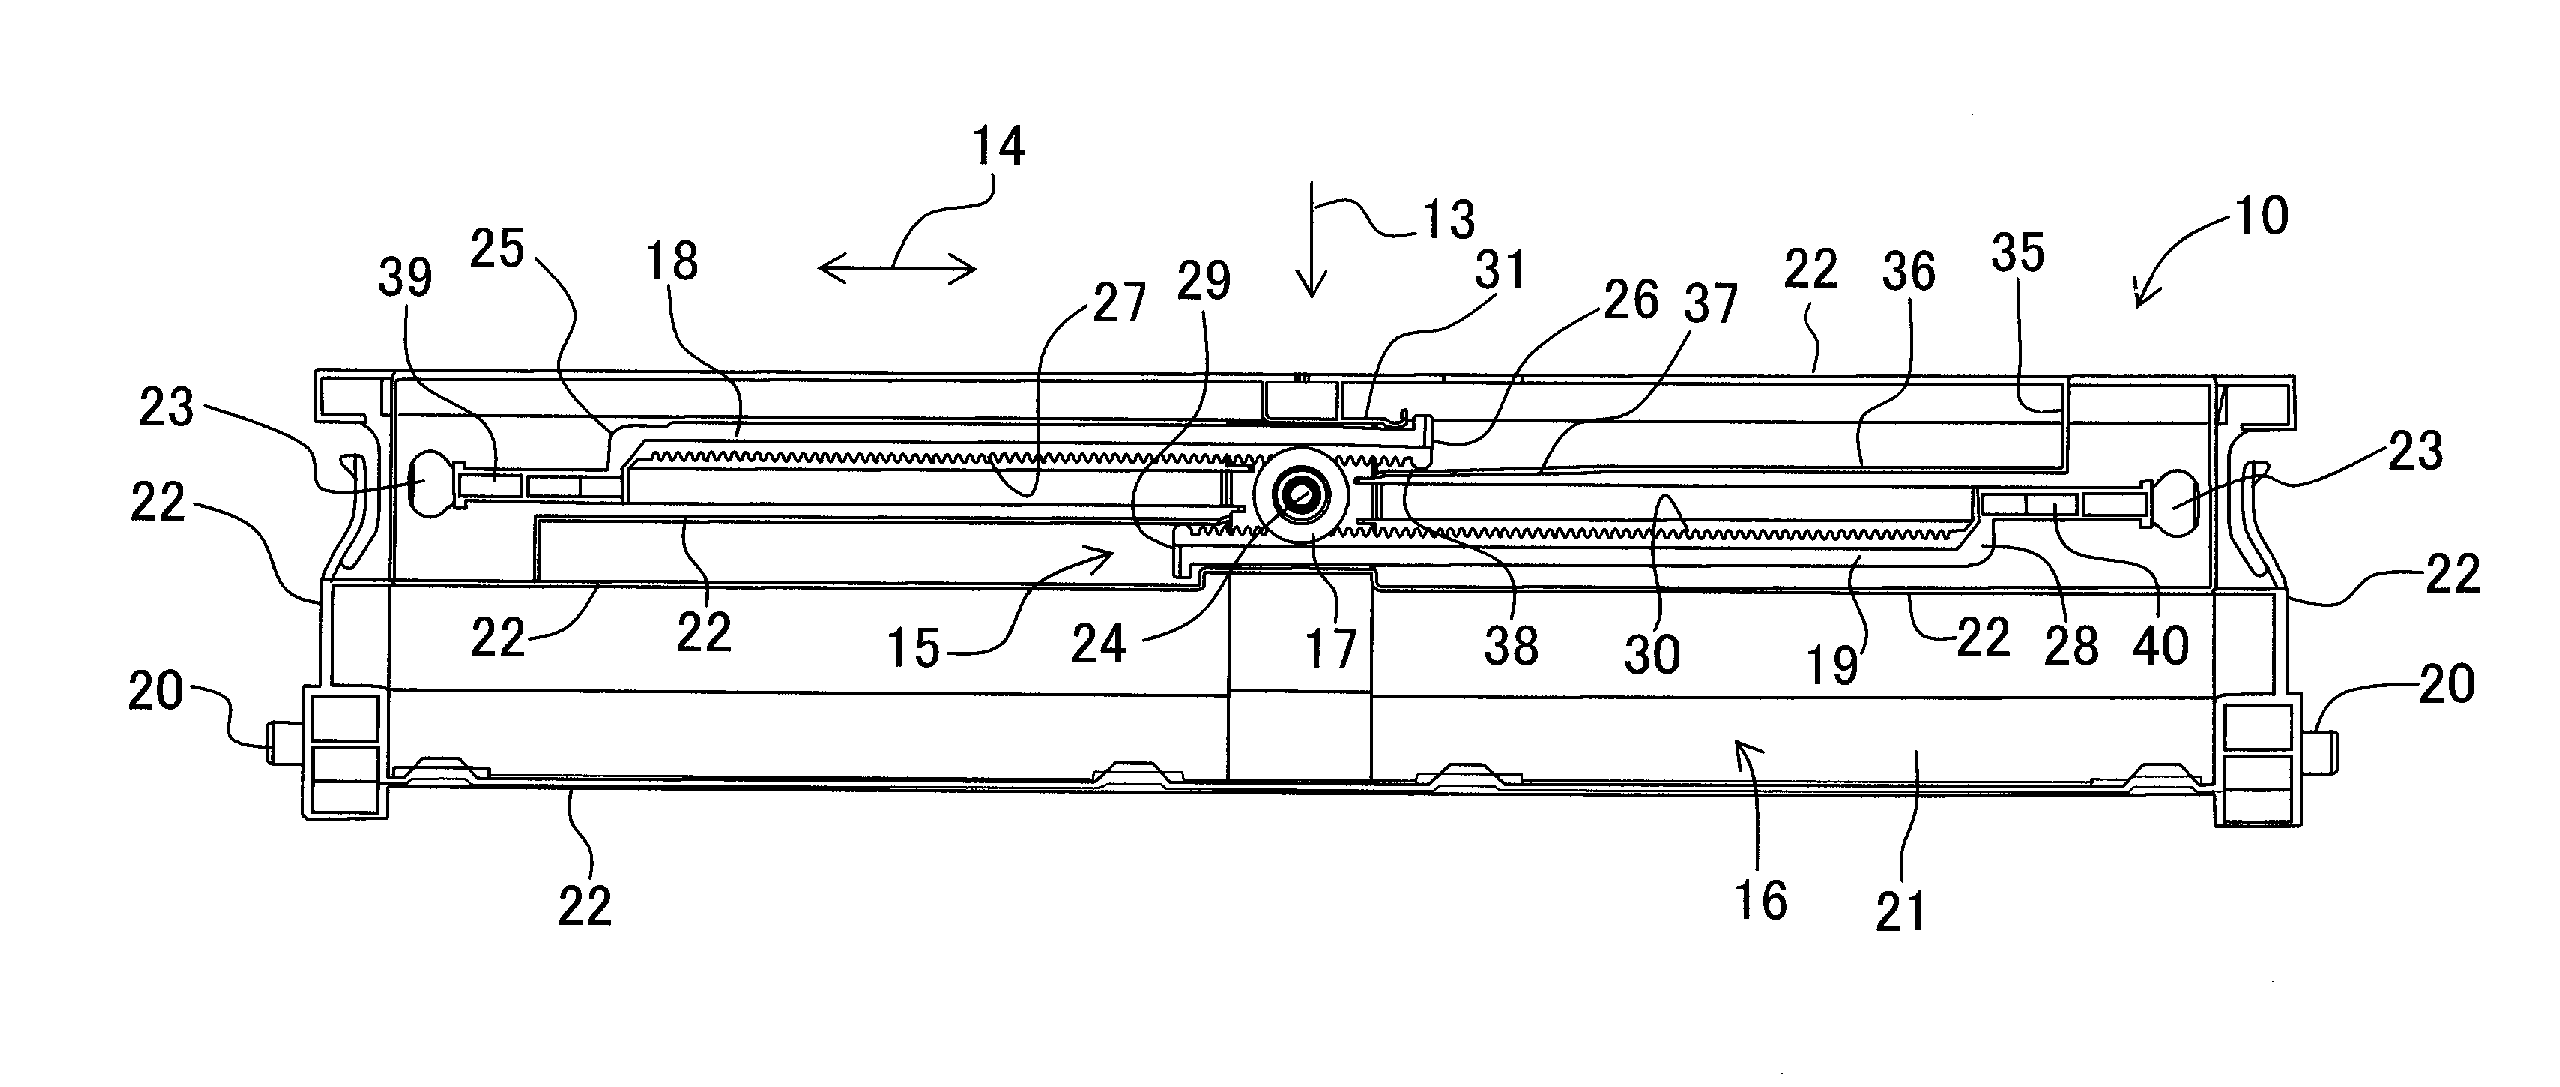 Sheet guide and image recording apparatus